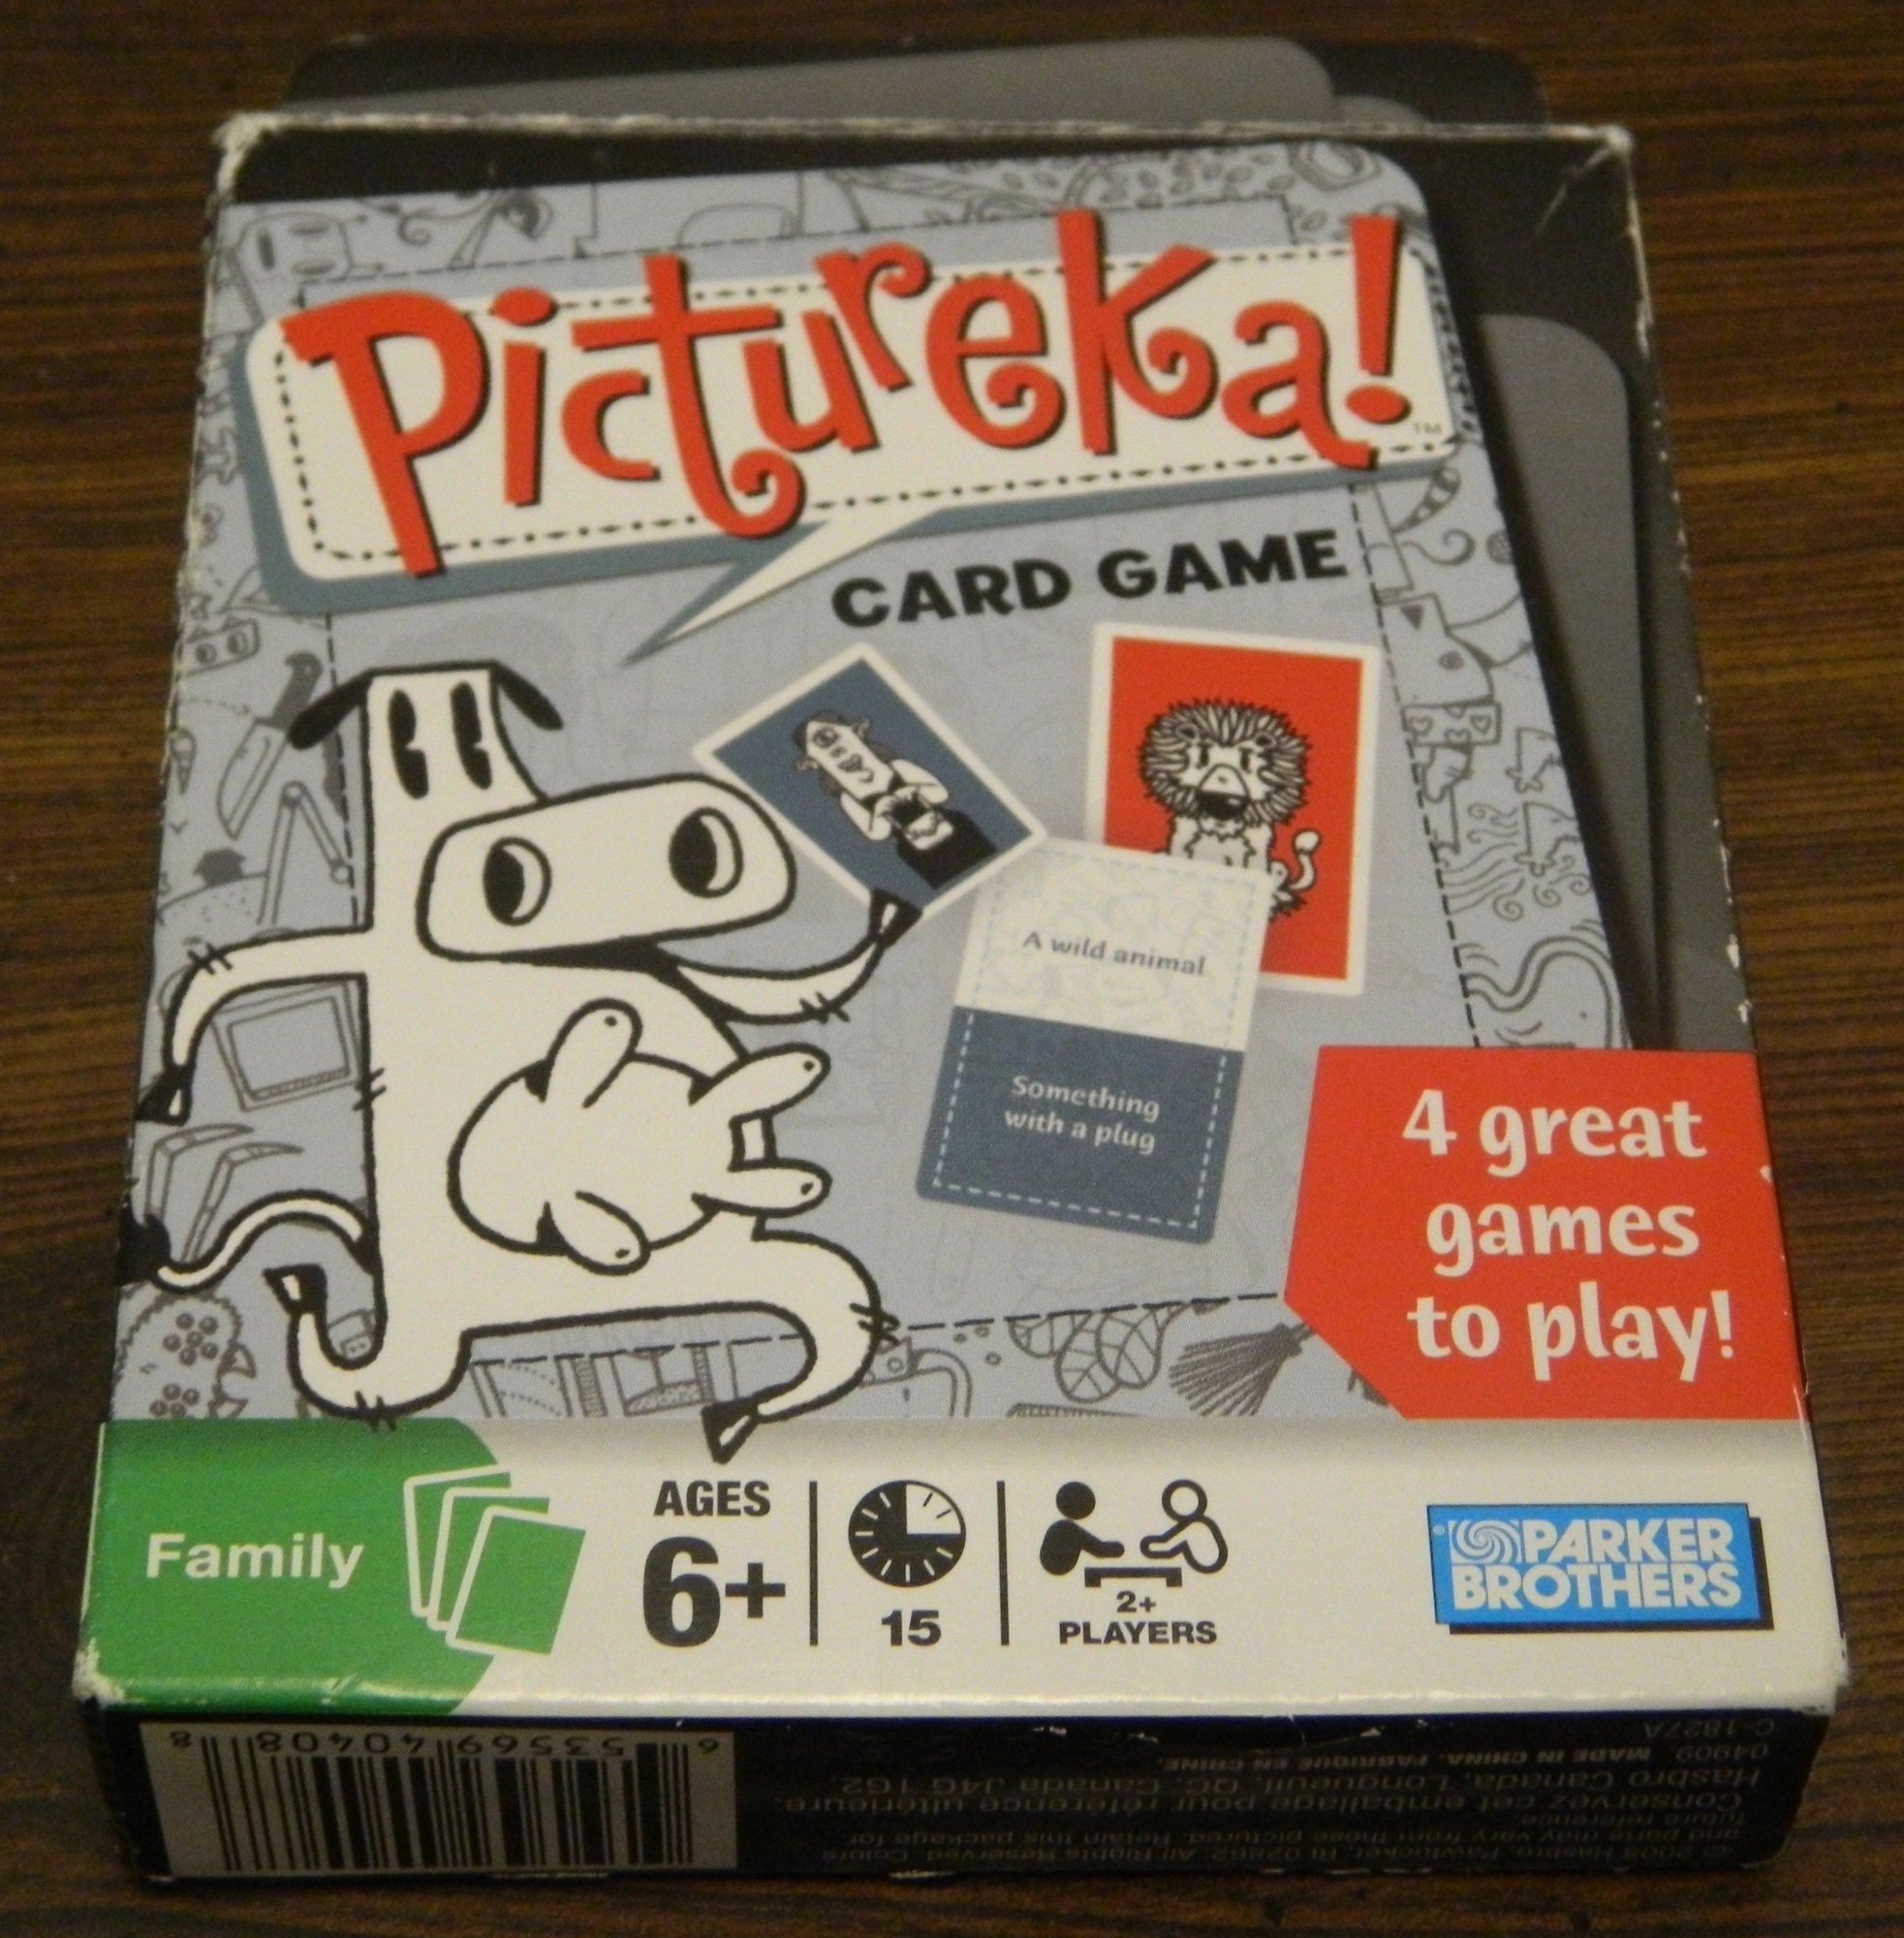 Box for Pictureka Card Game